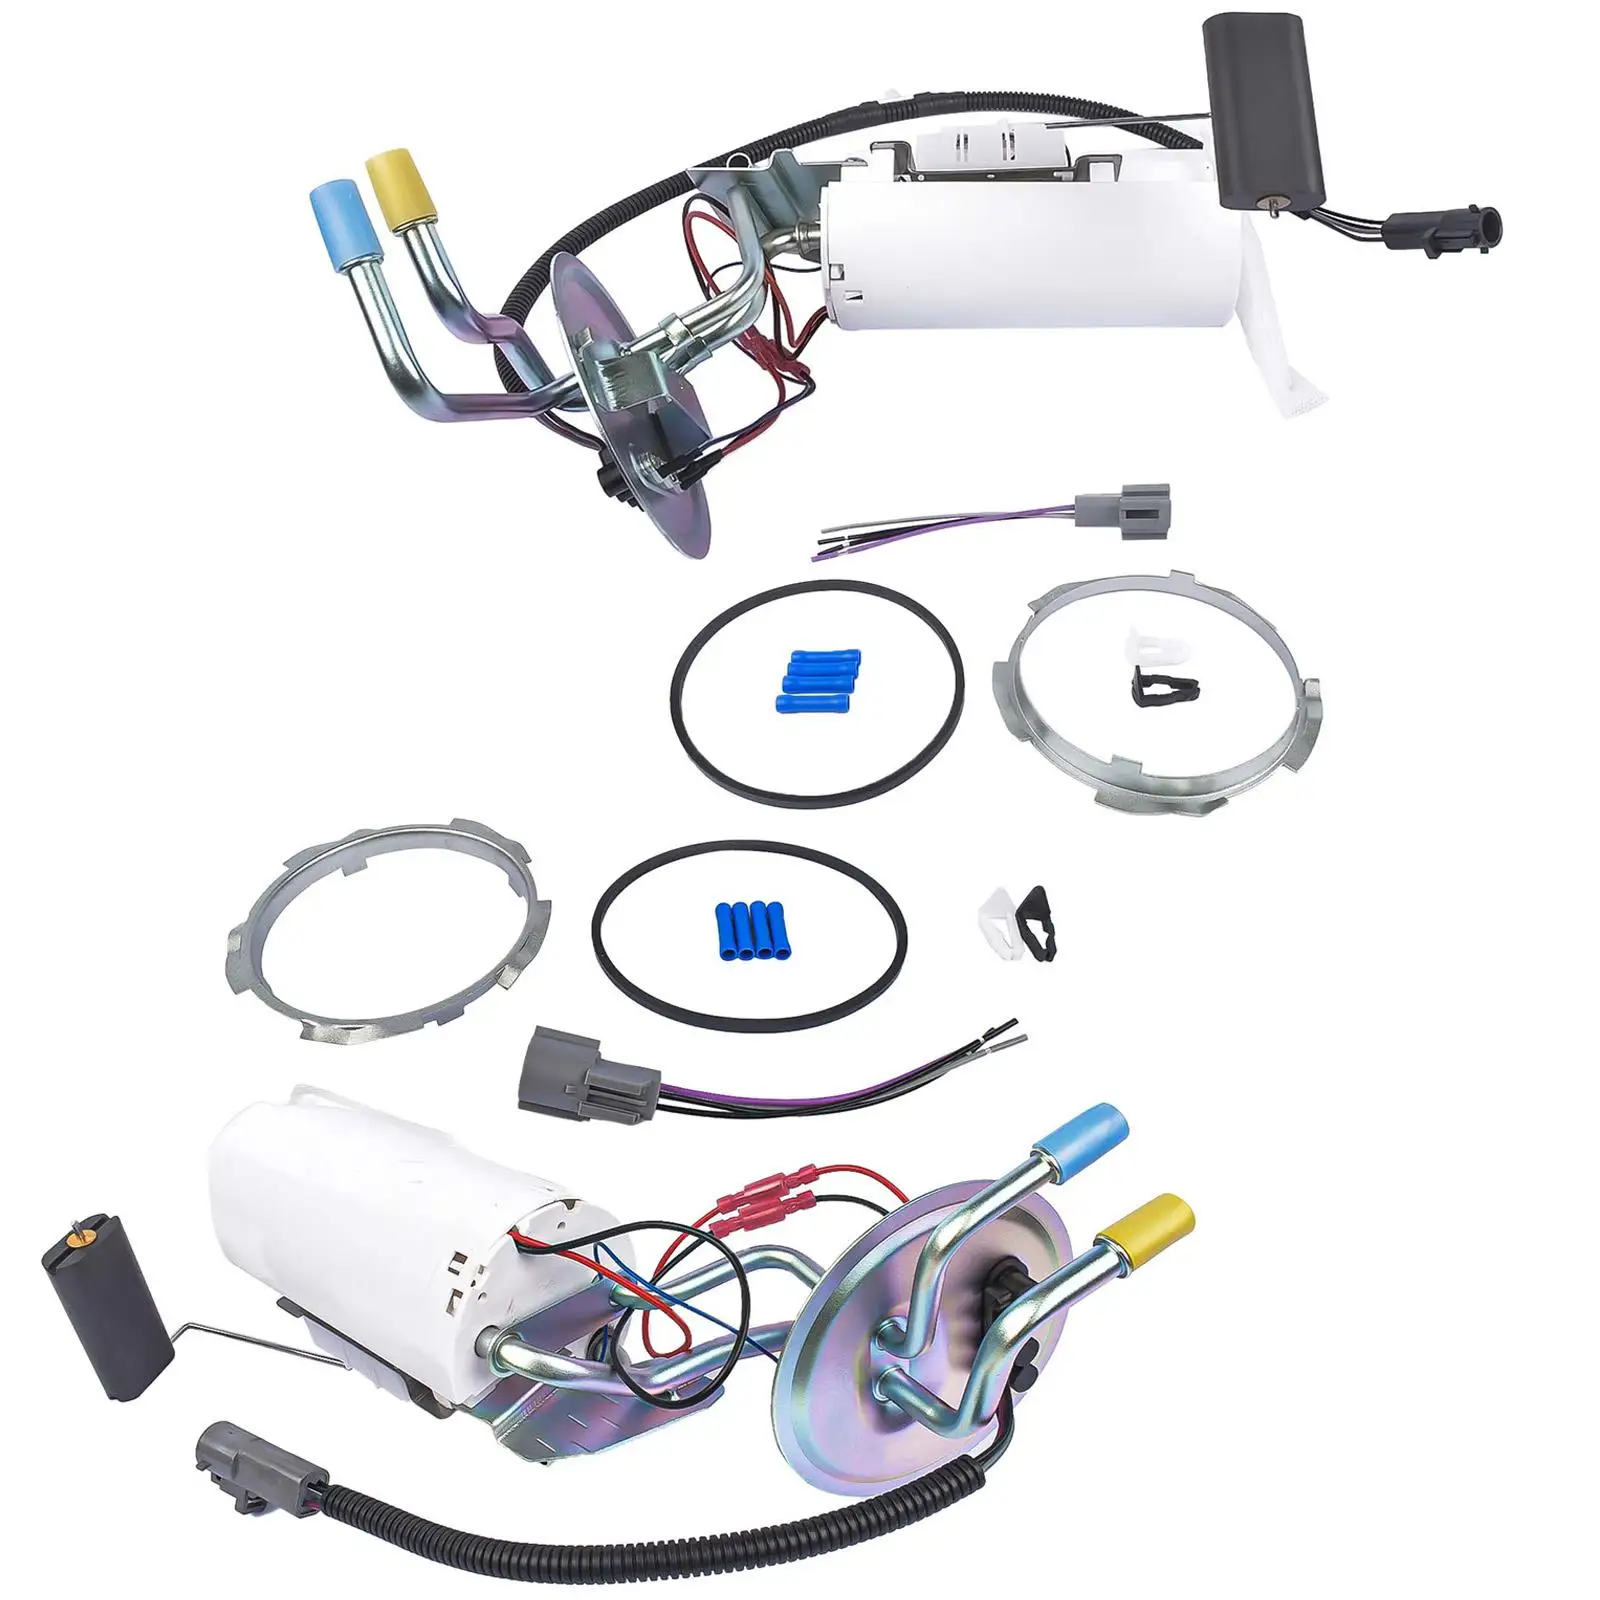 

AP03 Front 308GE Rear 309GE Fuel Pump Module Assembly For Ford F-150 F-250 350 92-96 SP2007H SP2005H